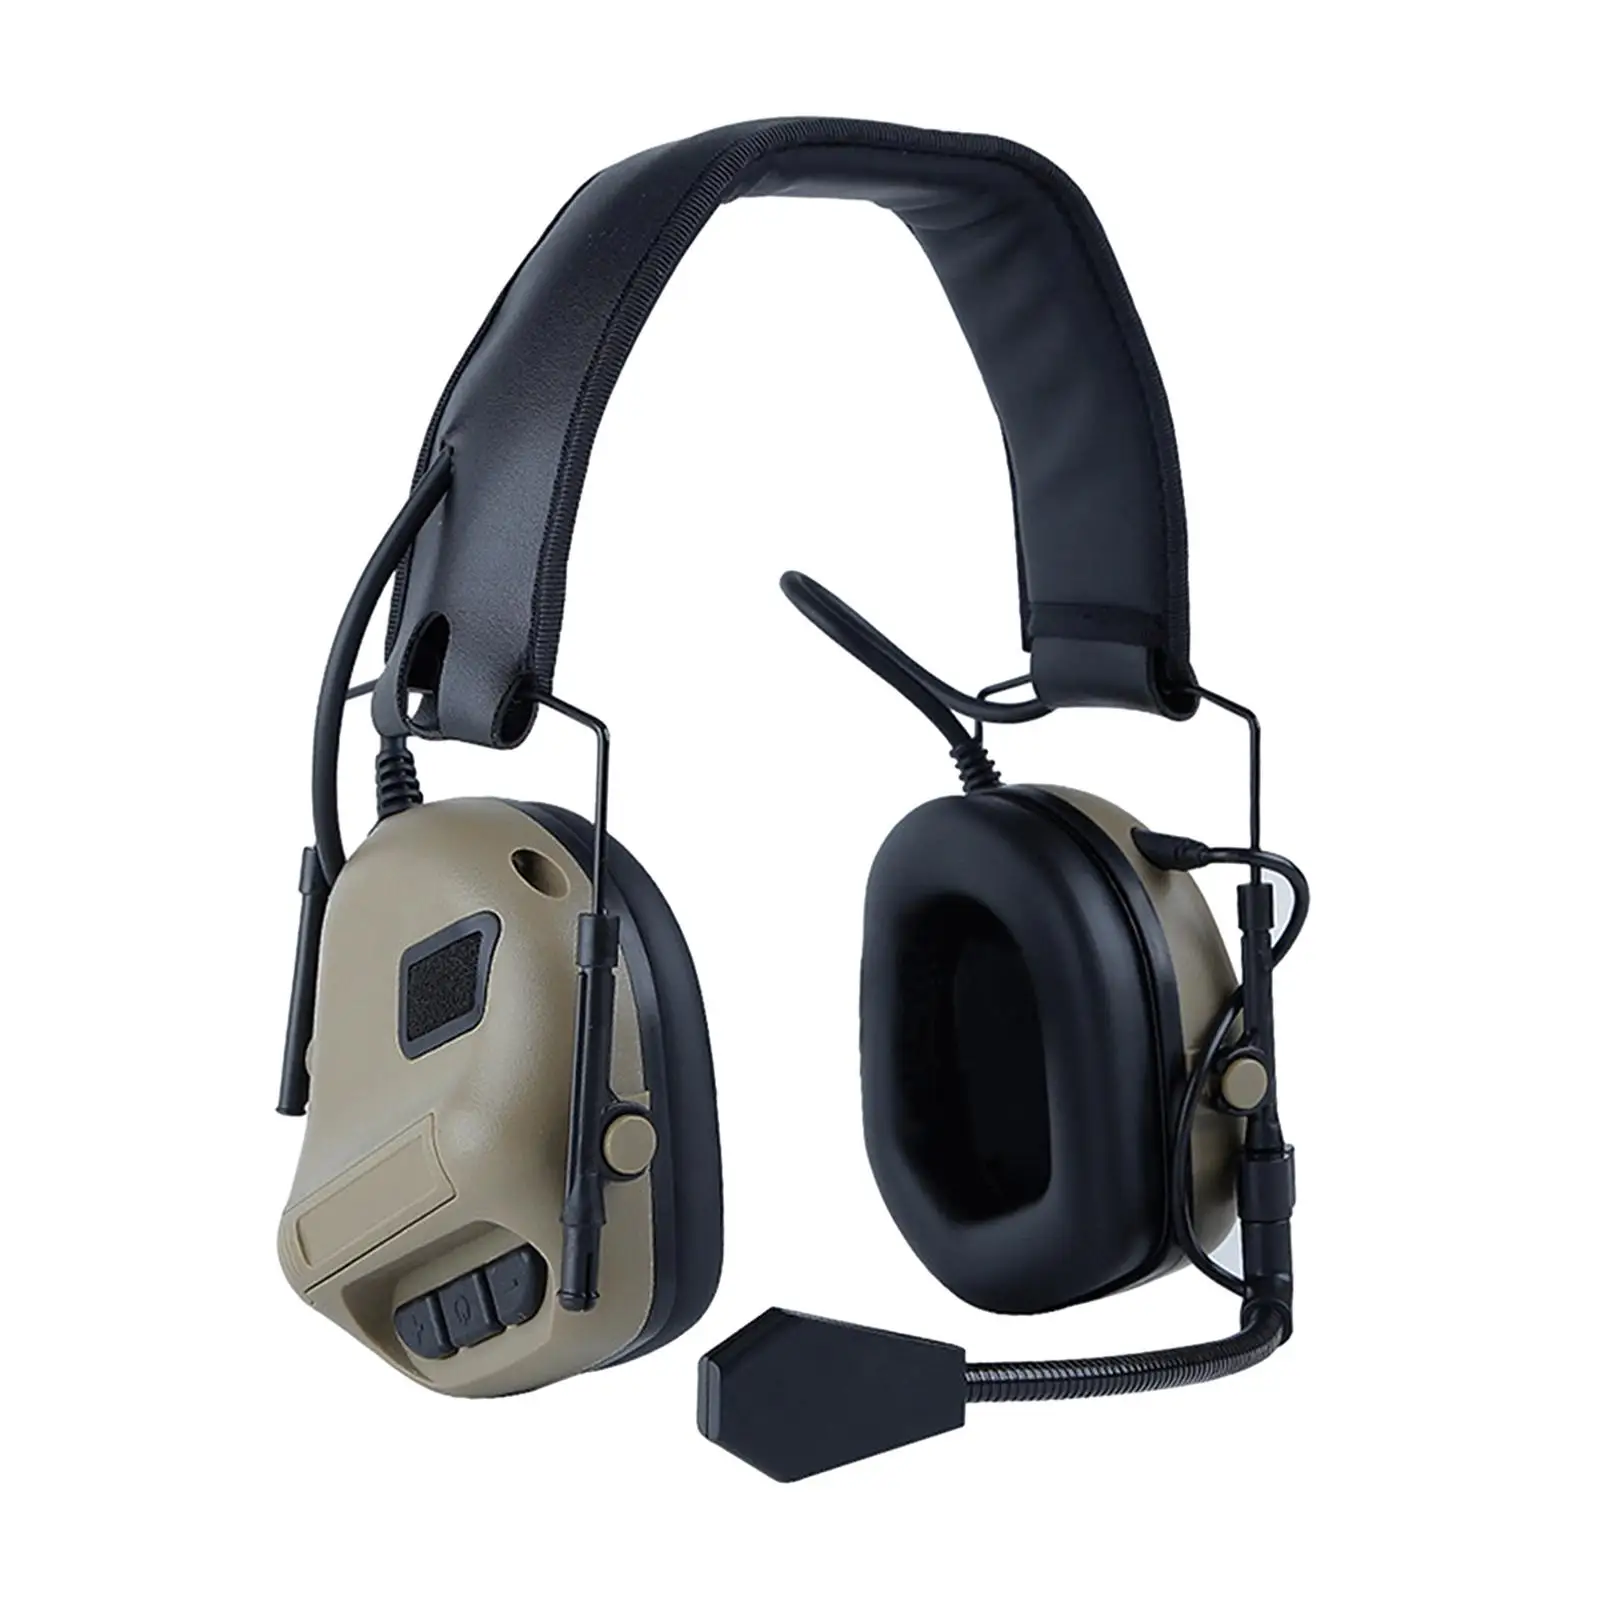 Hearing Protection Foldable Lightweight Ear Cups Ear Defenders Ear Muff for Lawn Mowing Manufacturing Sleeping Concerts Studying